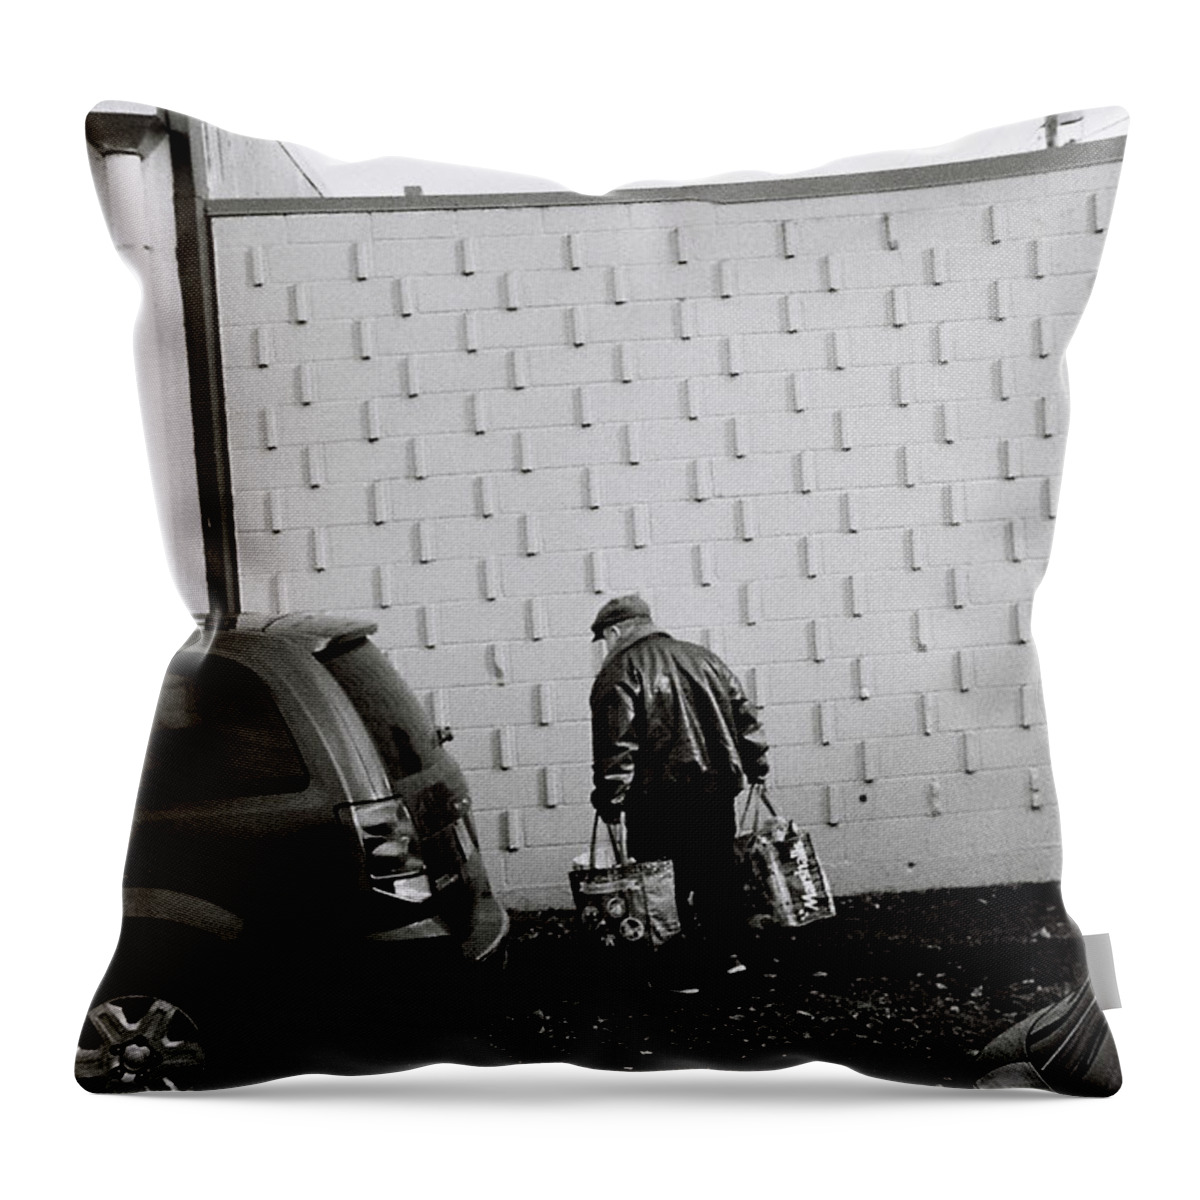 Street Photography Throw Pillow featuring the photograph Heavy Burdens by Chriss Pagani